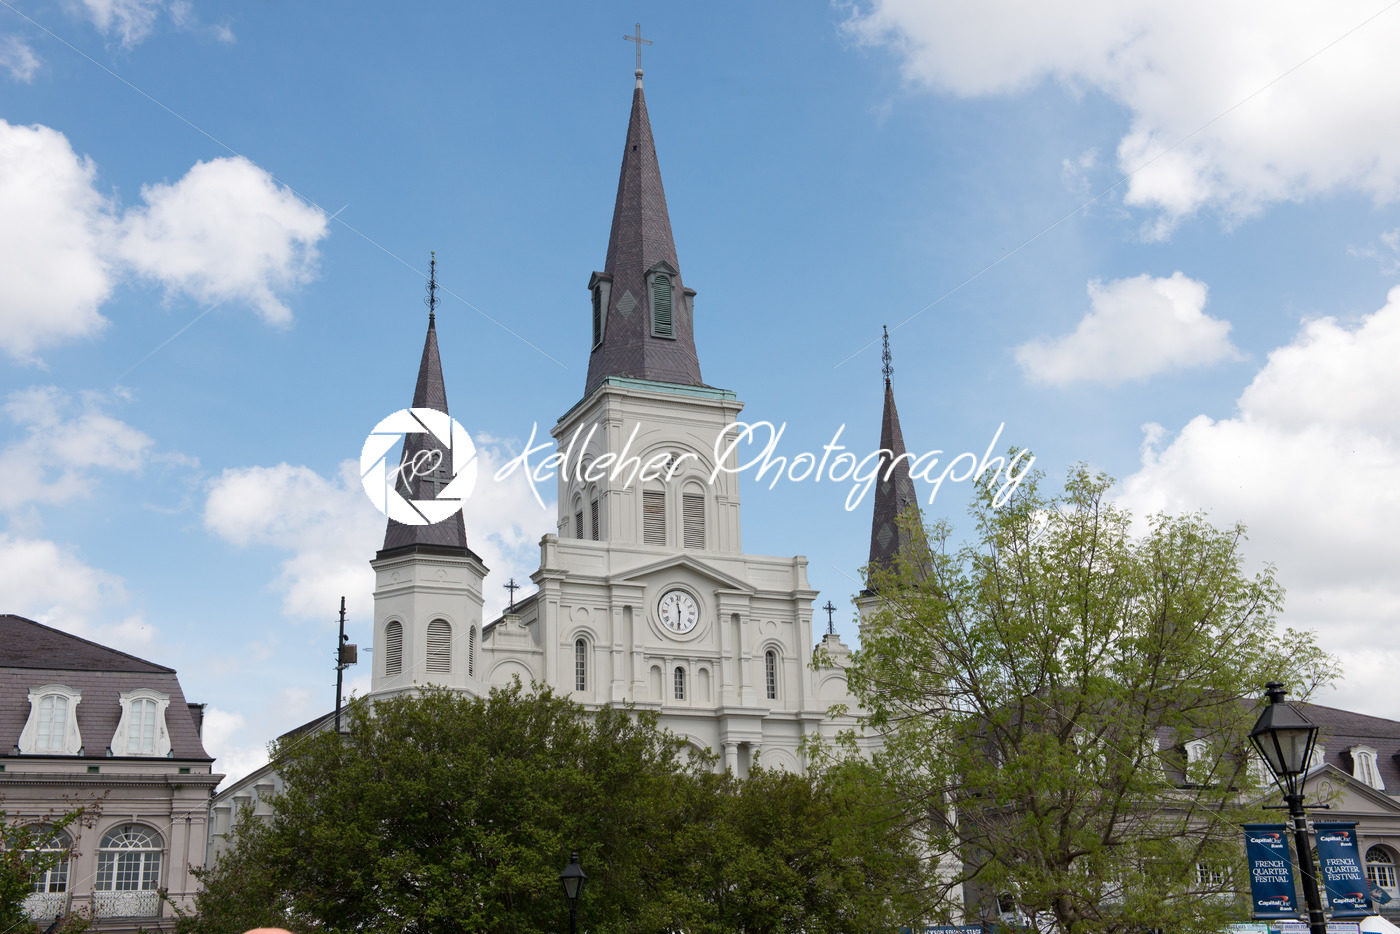 NEW ORLEANS, LA – APRIL 13: Beautiful architecture of Cathedral Basilica of Saint Louis in Jackson Square, New Orleans, LA on April 13, 2014 - Kelleher Photography Store